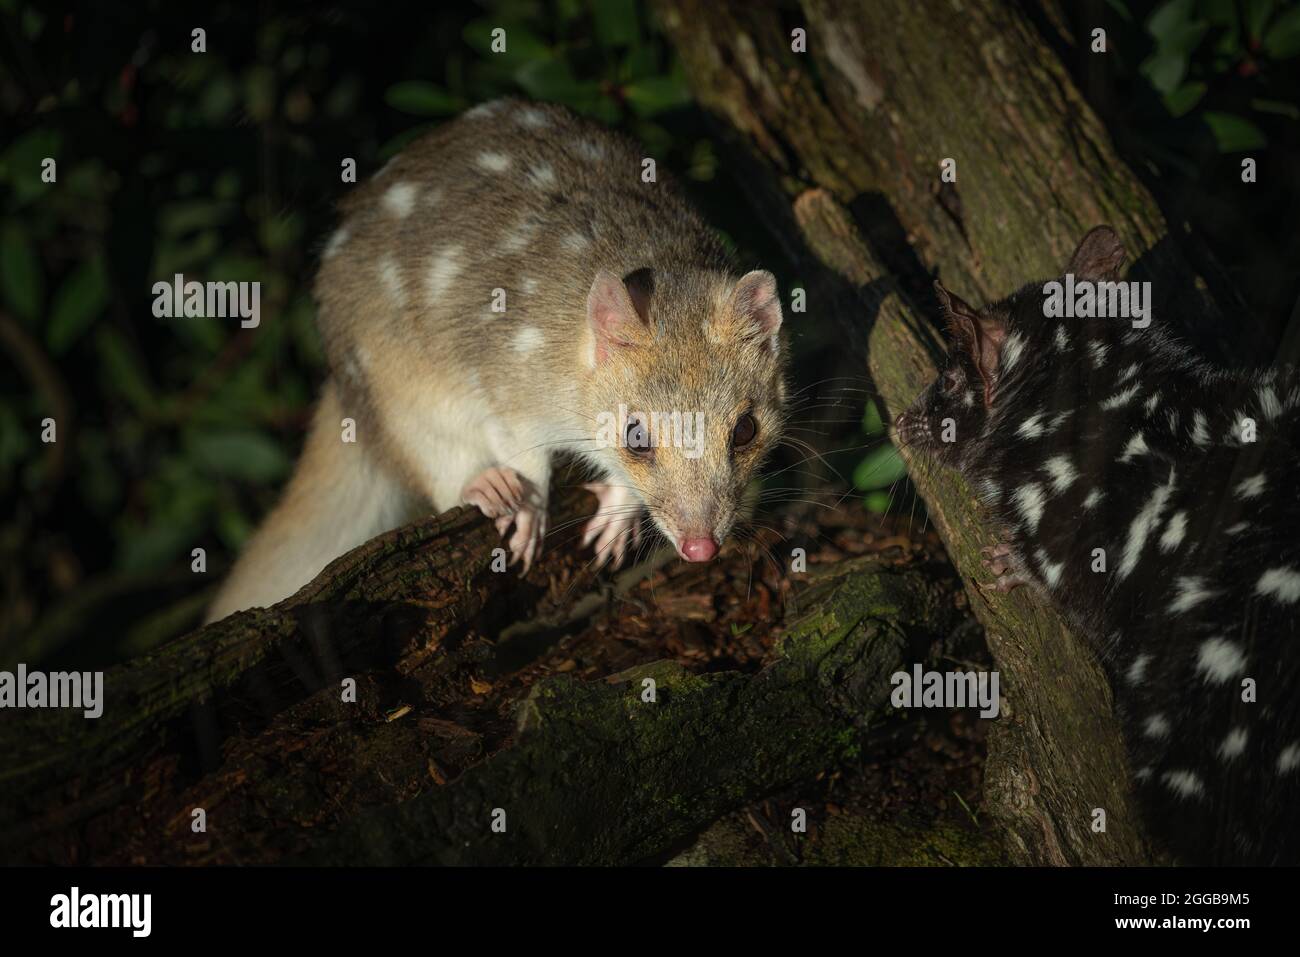 An black eastern quolls in the zoo Stock Photo